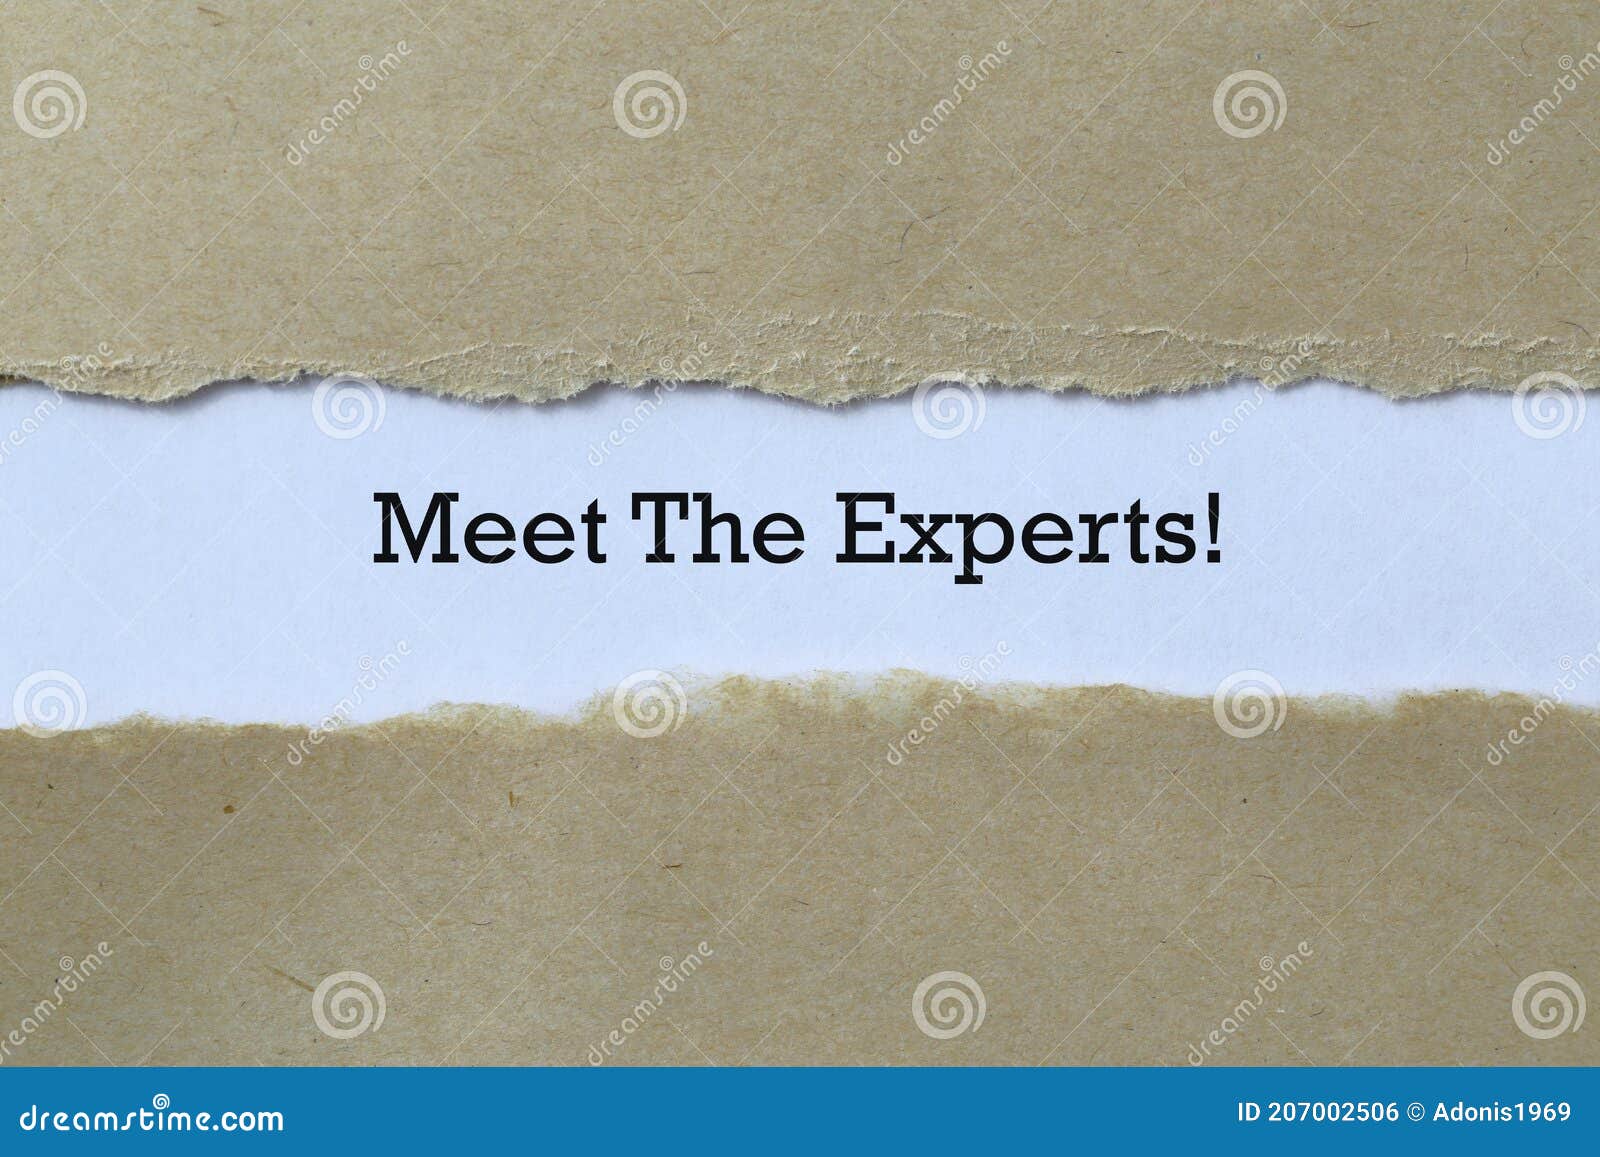 meet the experts on paper